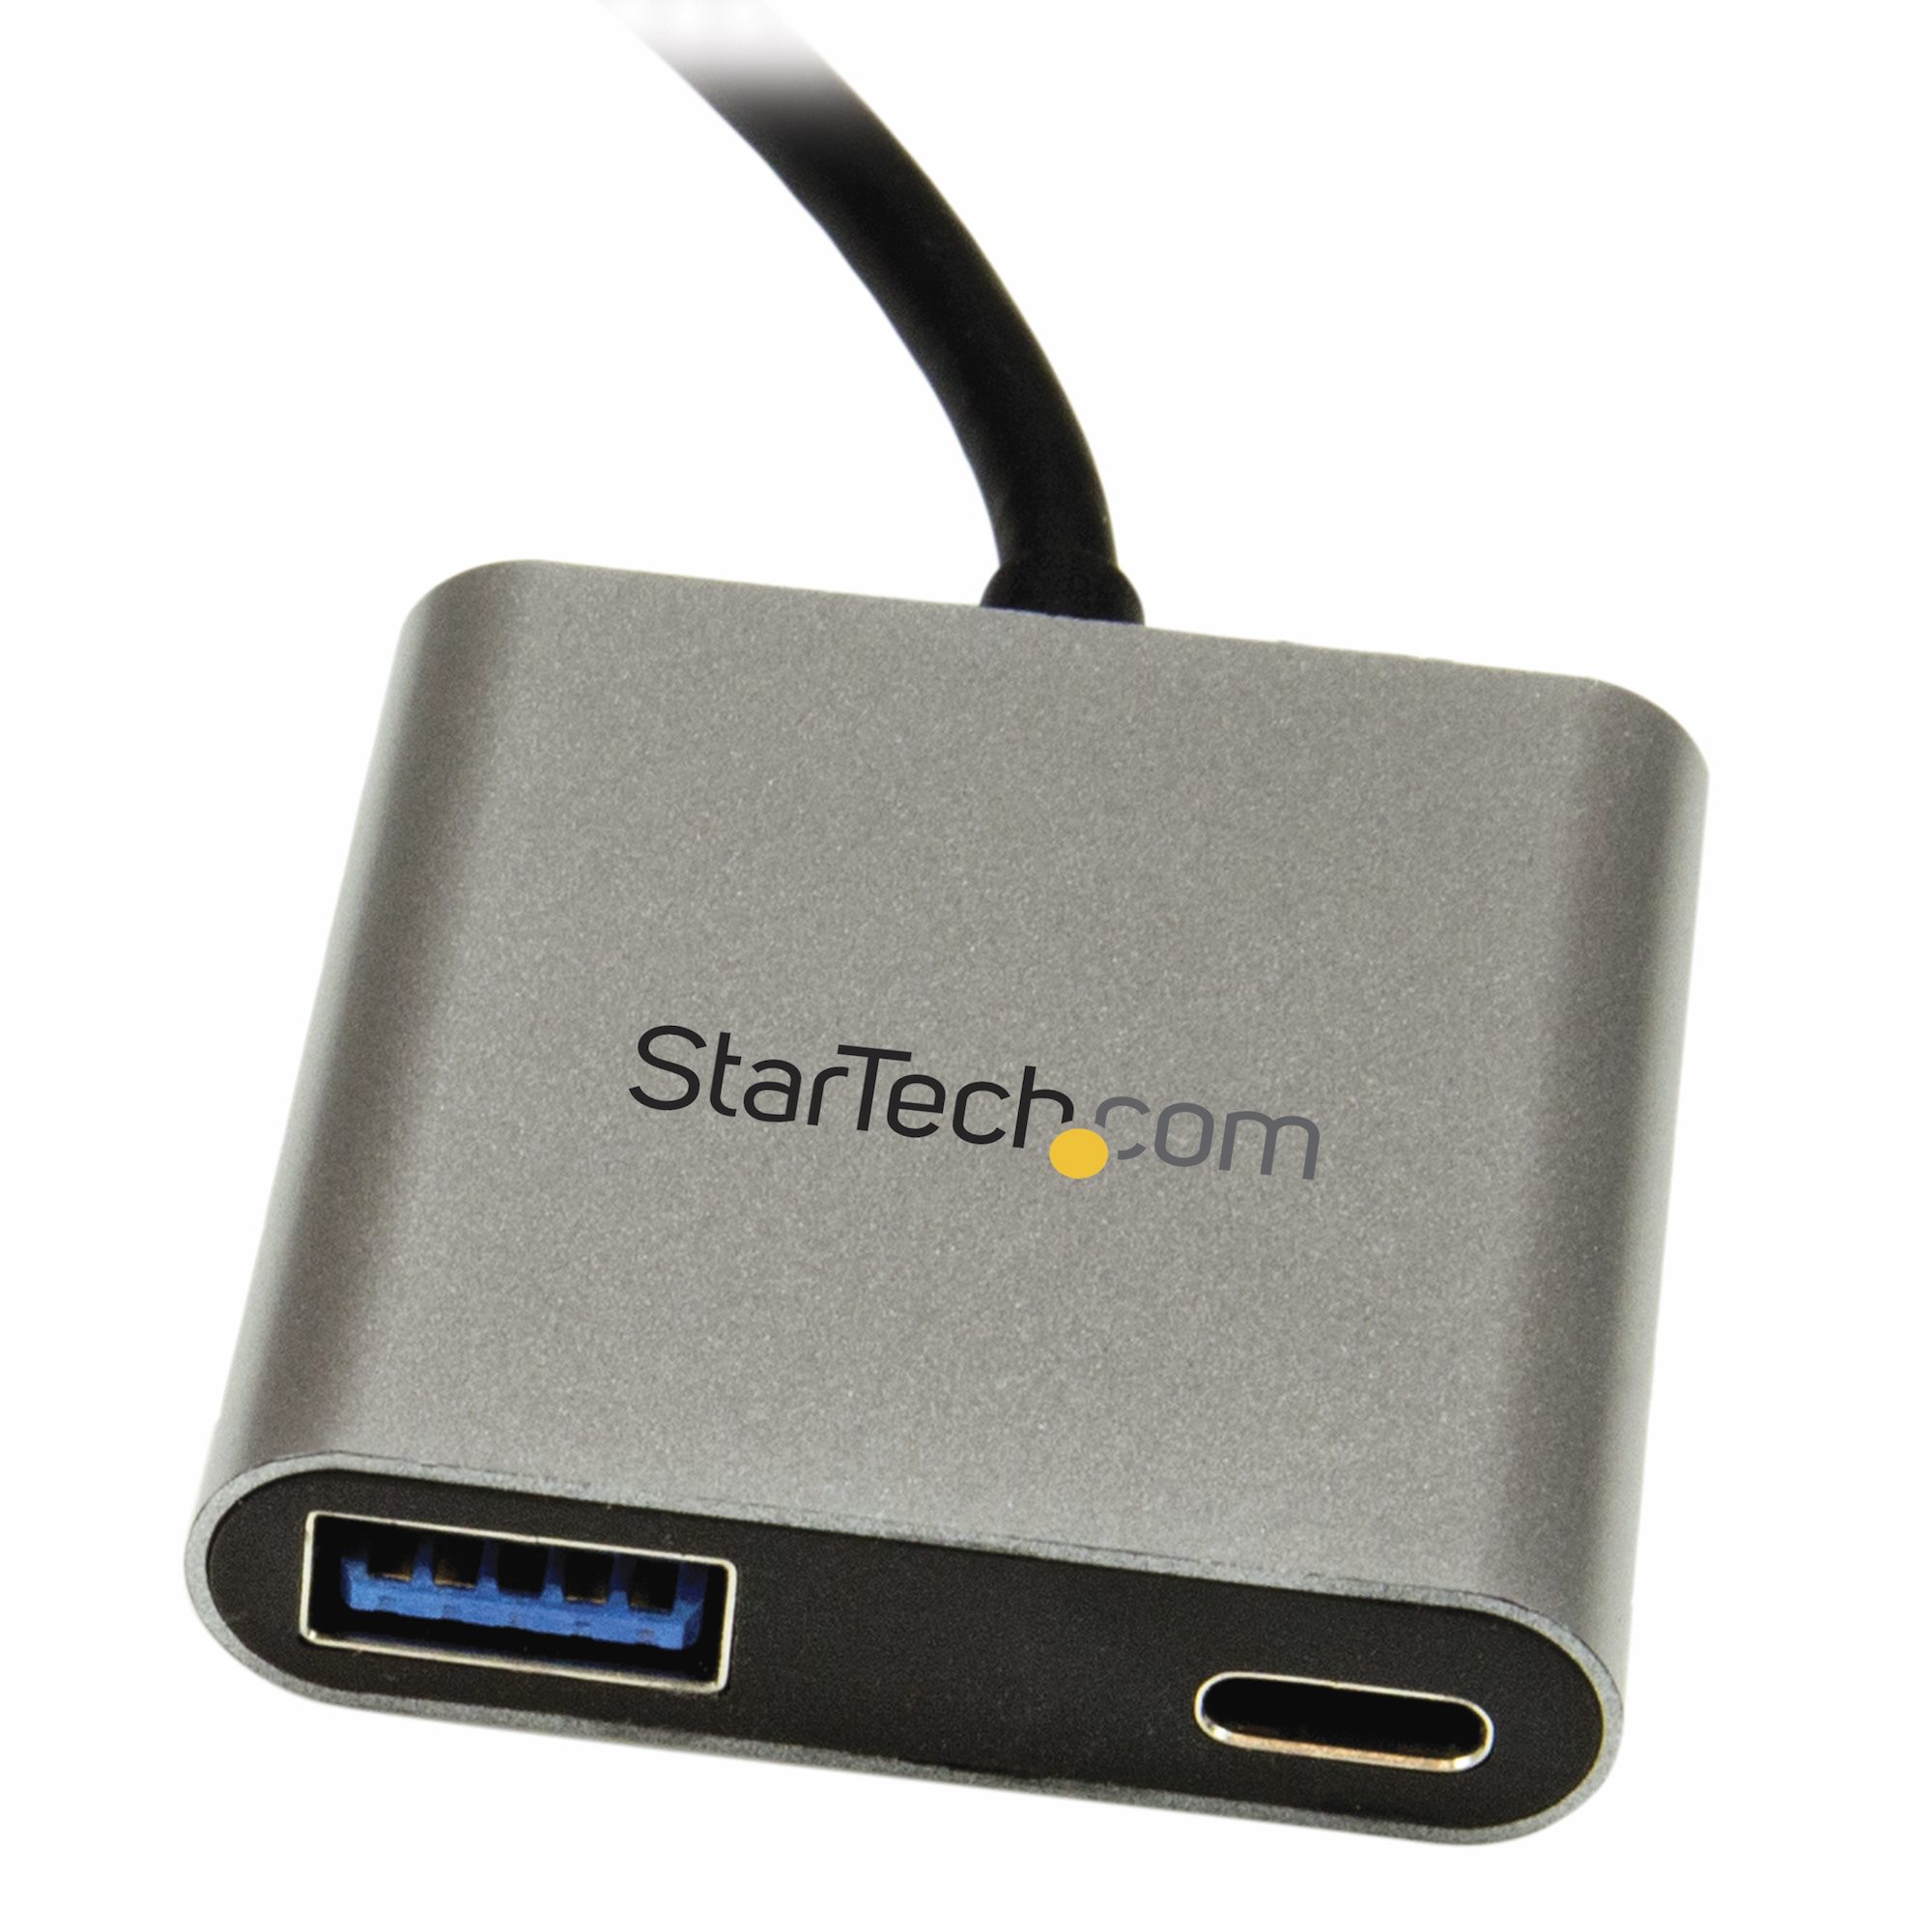 Usb c power delivery. STARTECH Type c to USB 3.0 Hub. Type-c Adapter FIREWIRE 800. FIREWIRE USB C. USB-C Power delivery разъем.